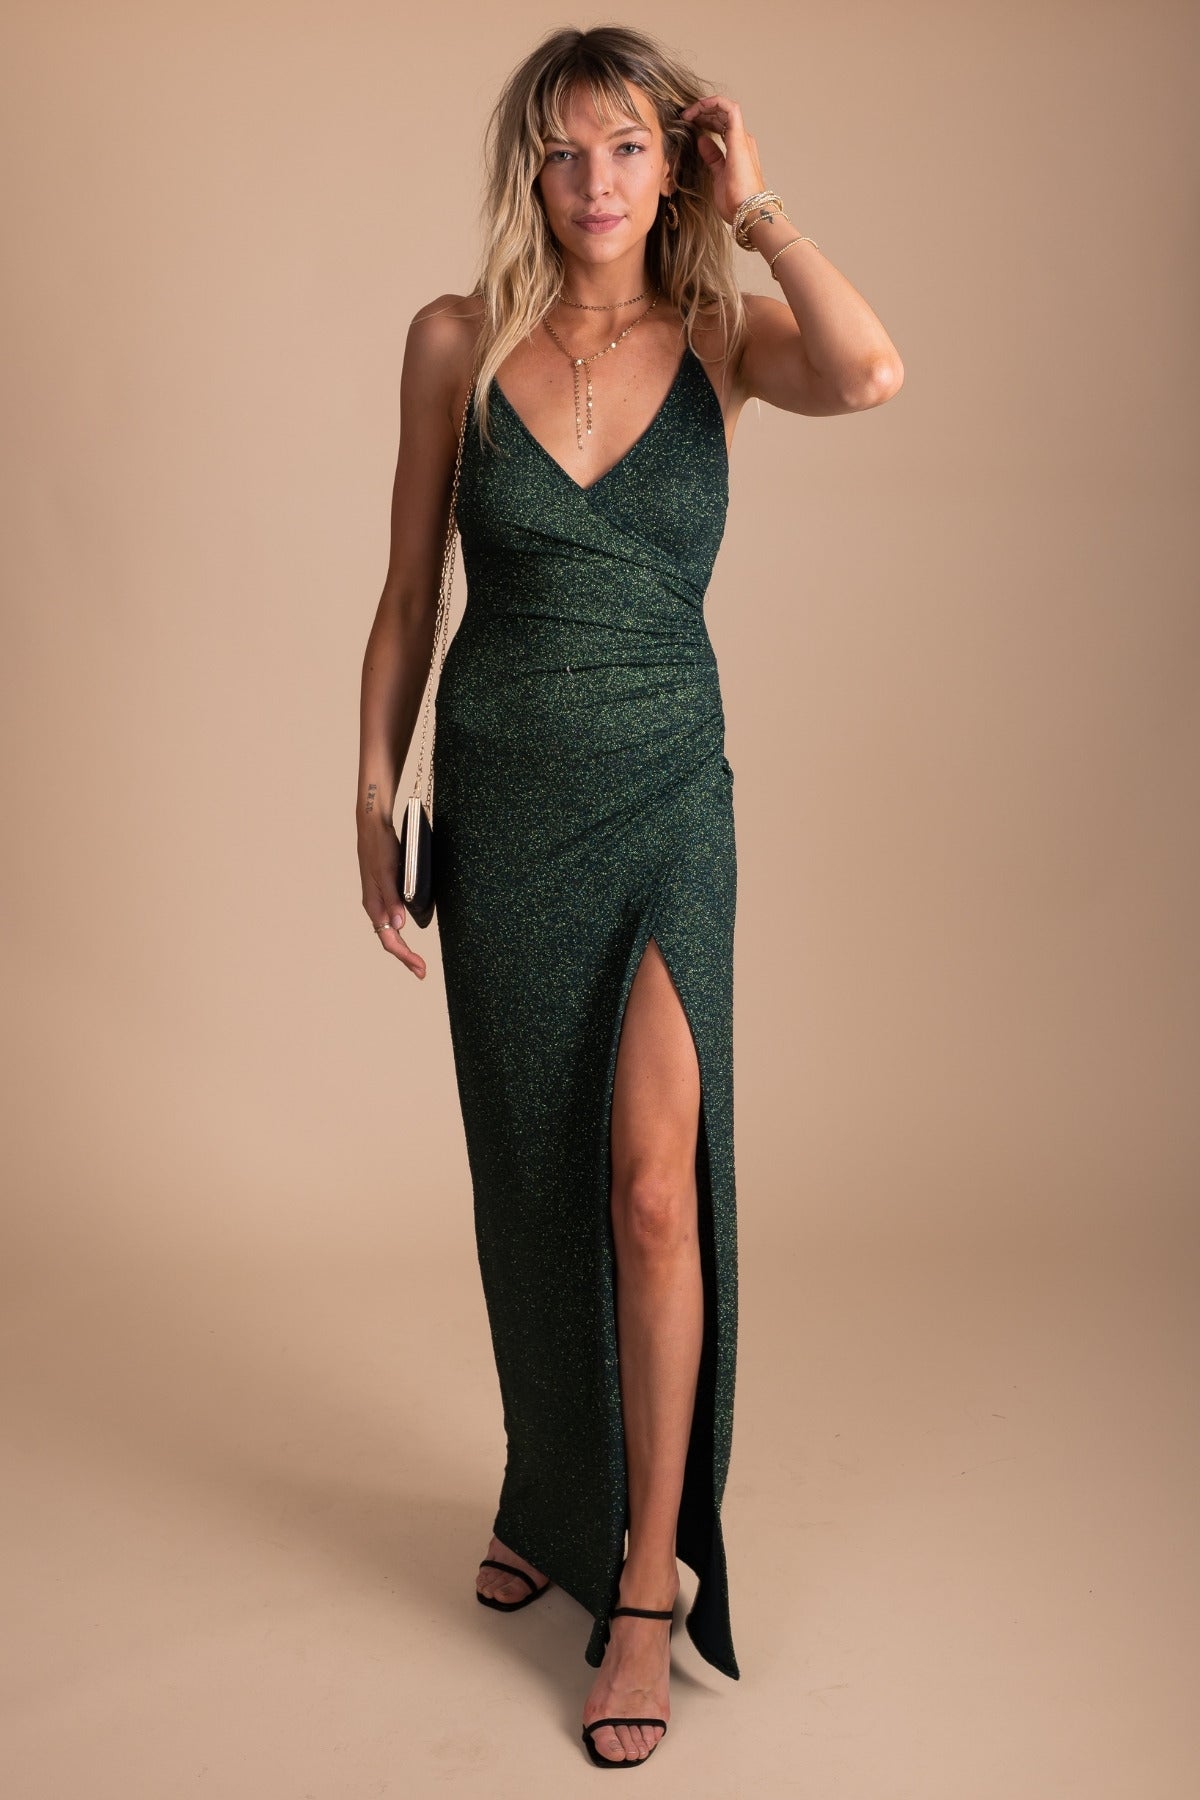 Hunter Green Formal Maxi Dress with Side Slit to Thigh